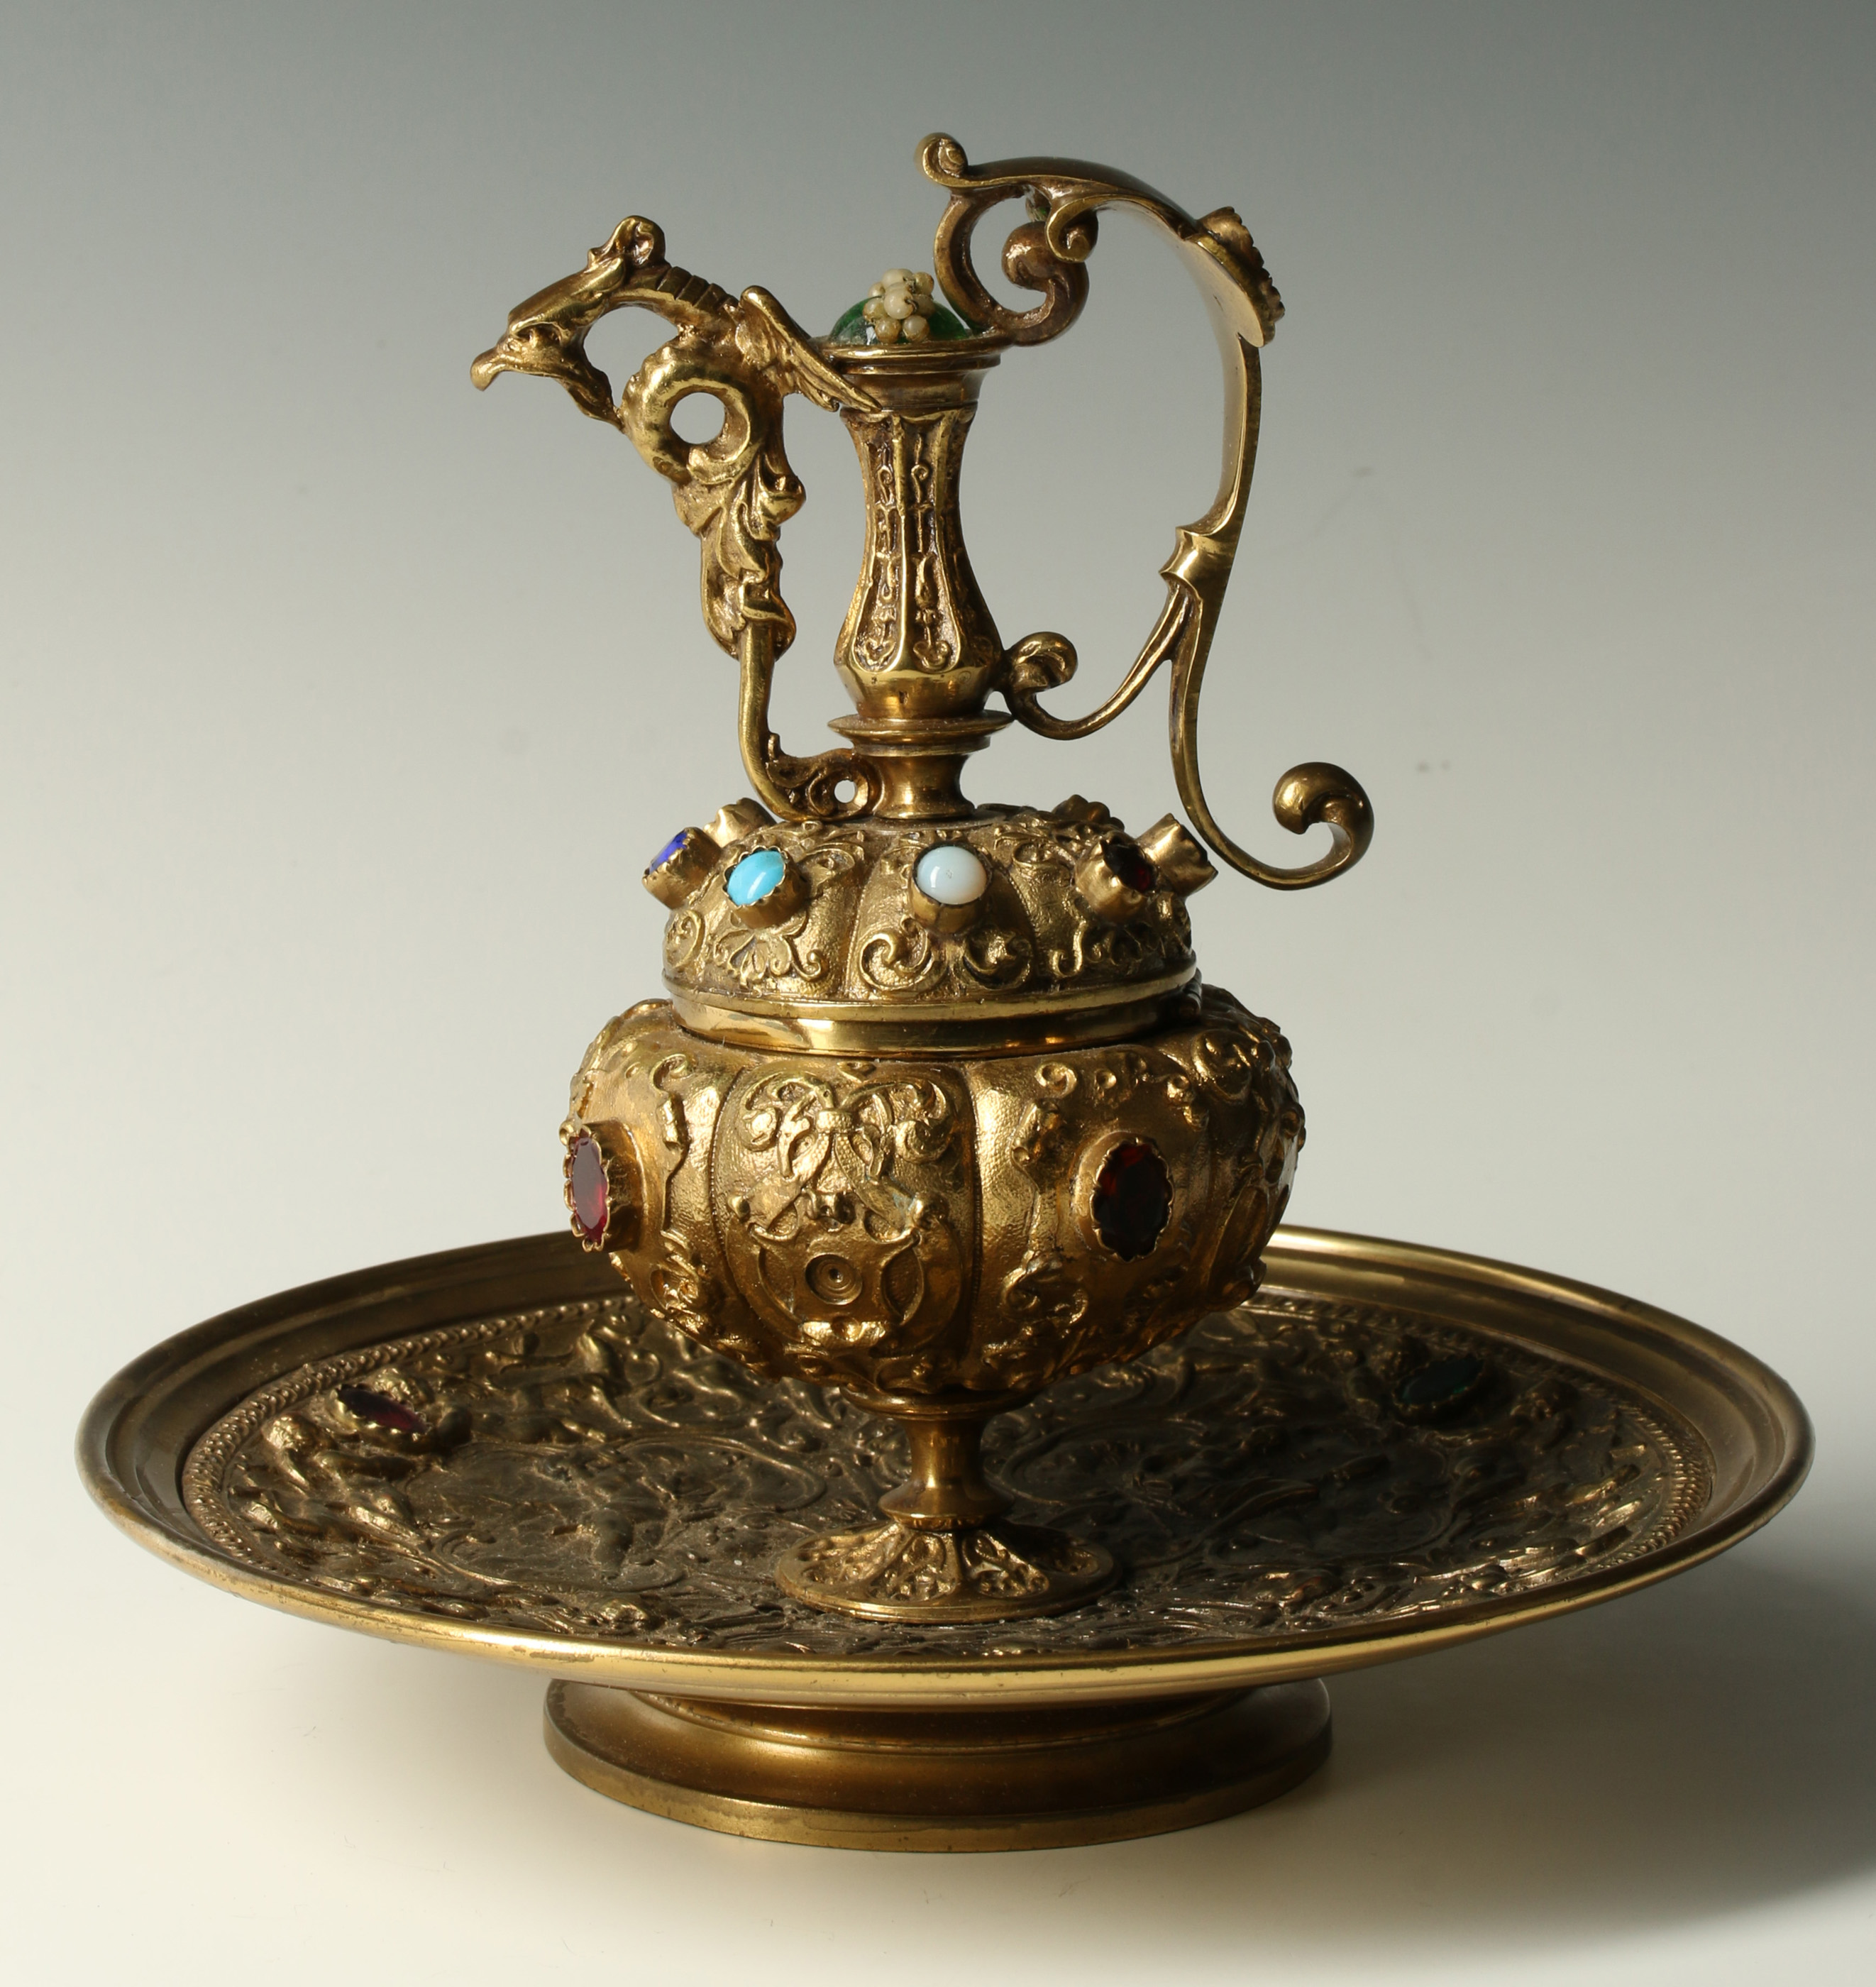 A FAUX JEWEL CONTINENTAL EWER FORM INK STAND